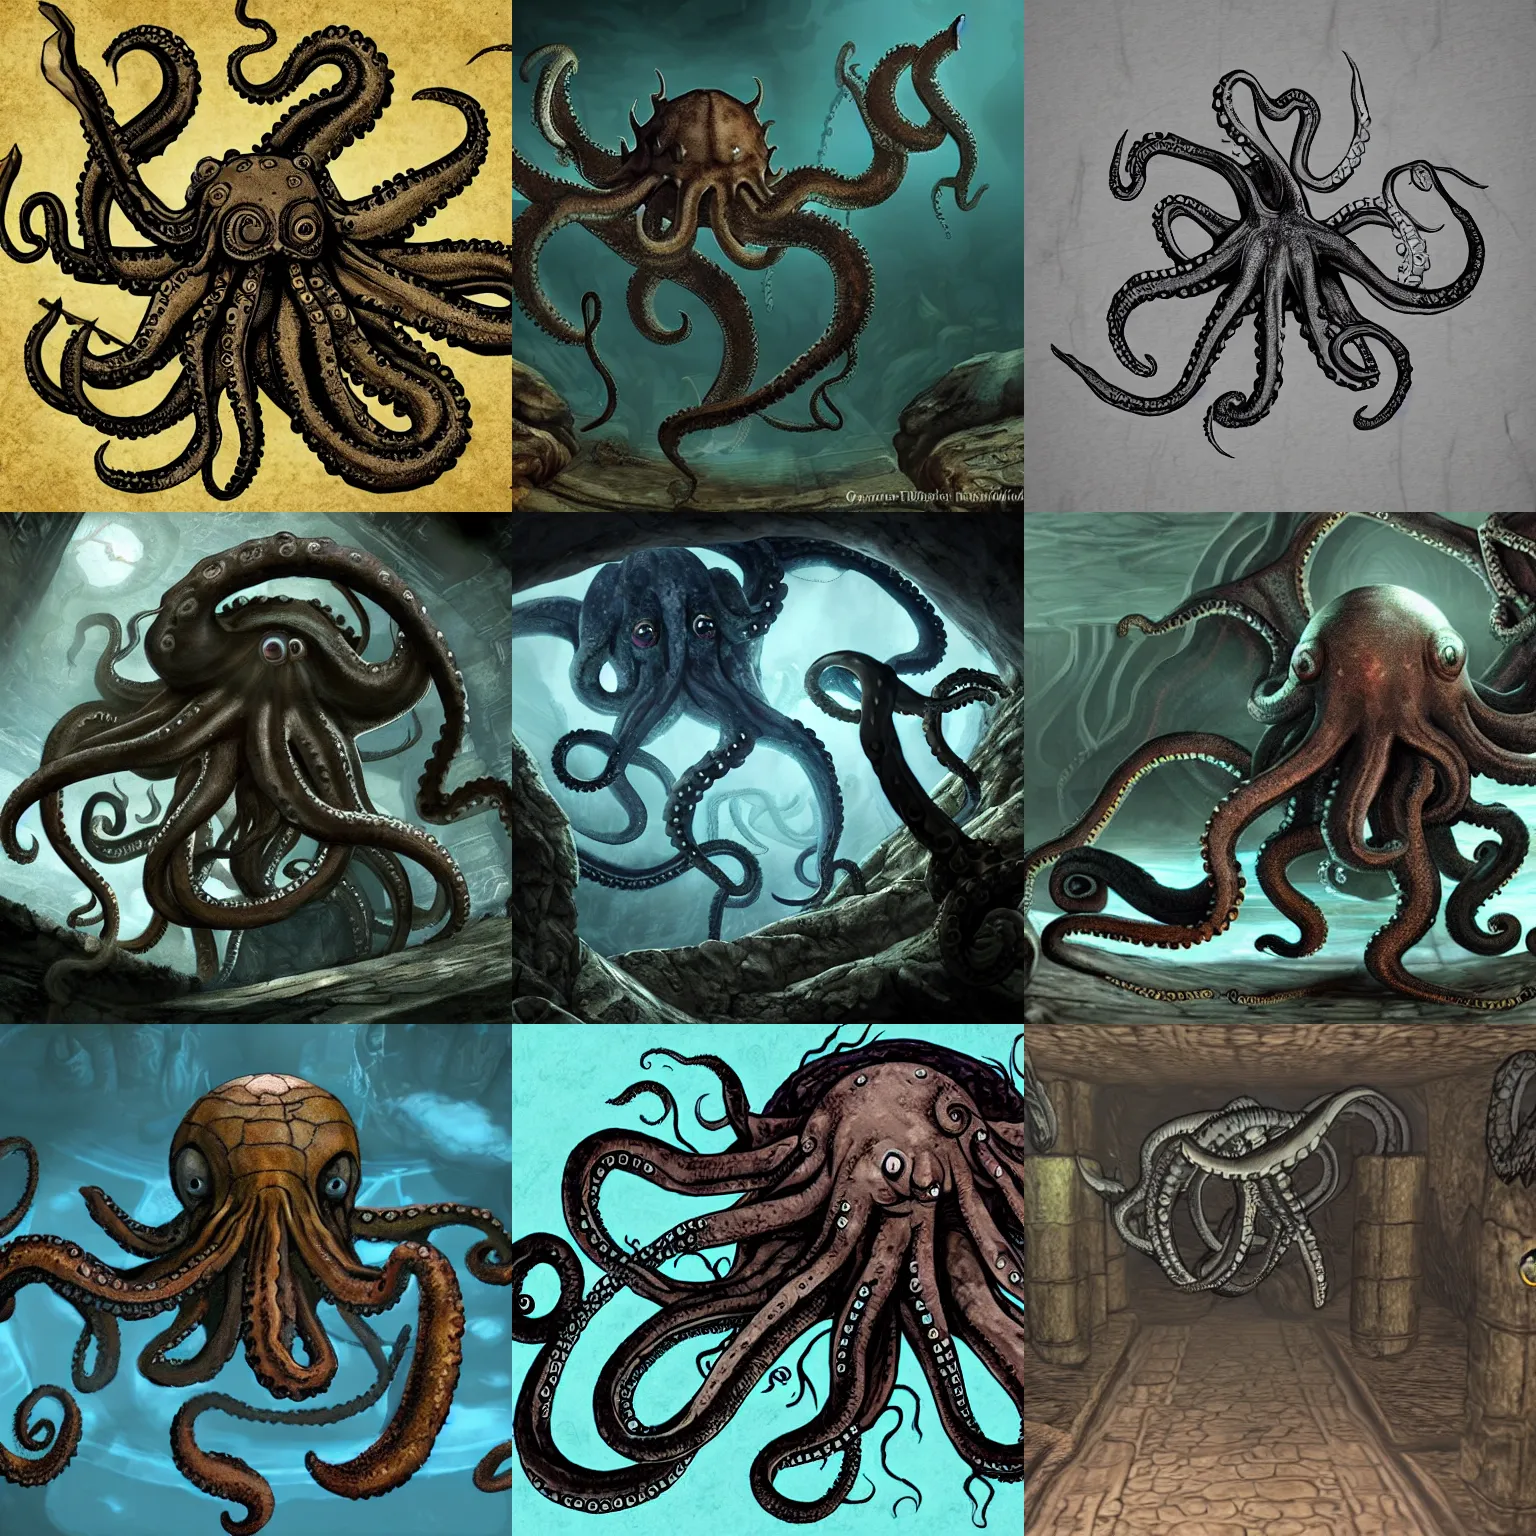 Prompt: kraken octopus monster walking in an ancient underground tomb in the style of skyrim by bethesda game studio